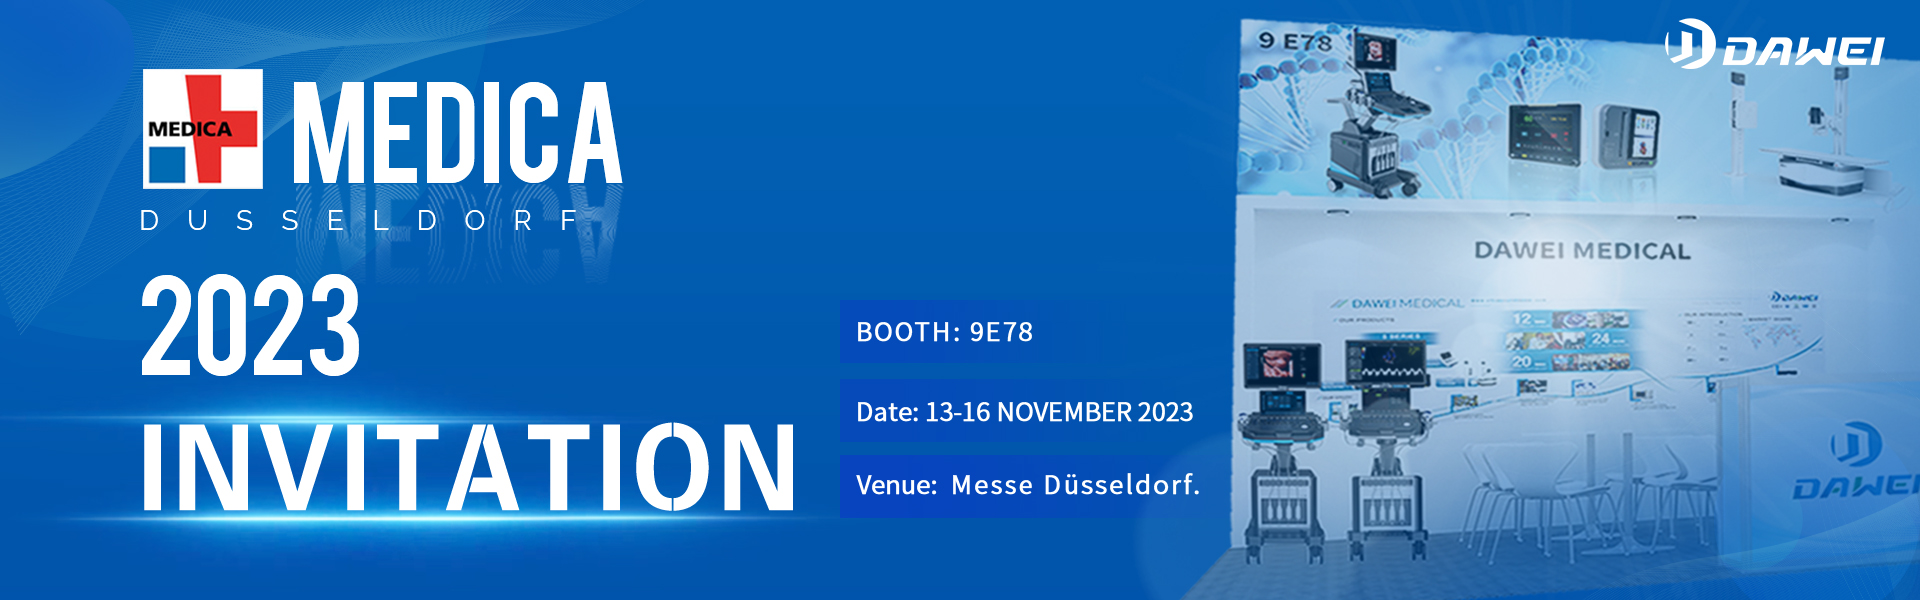 Germany medica expo banner